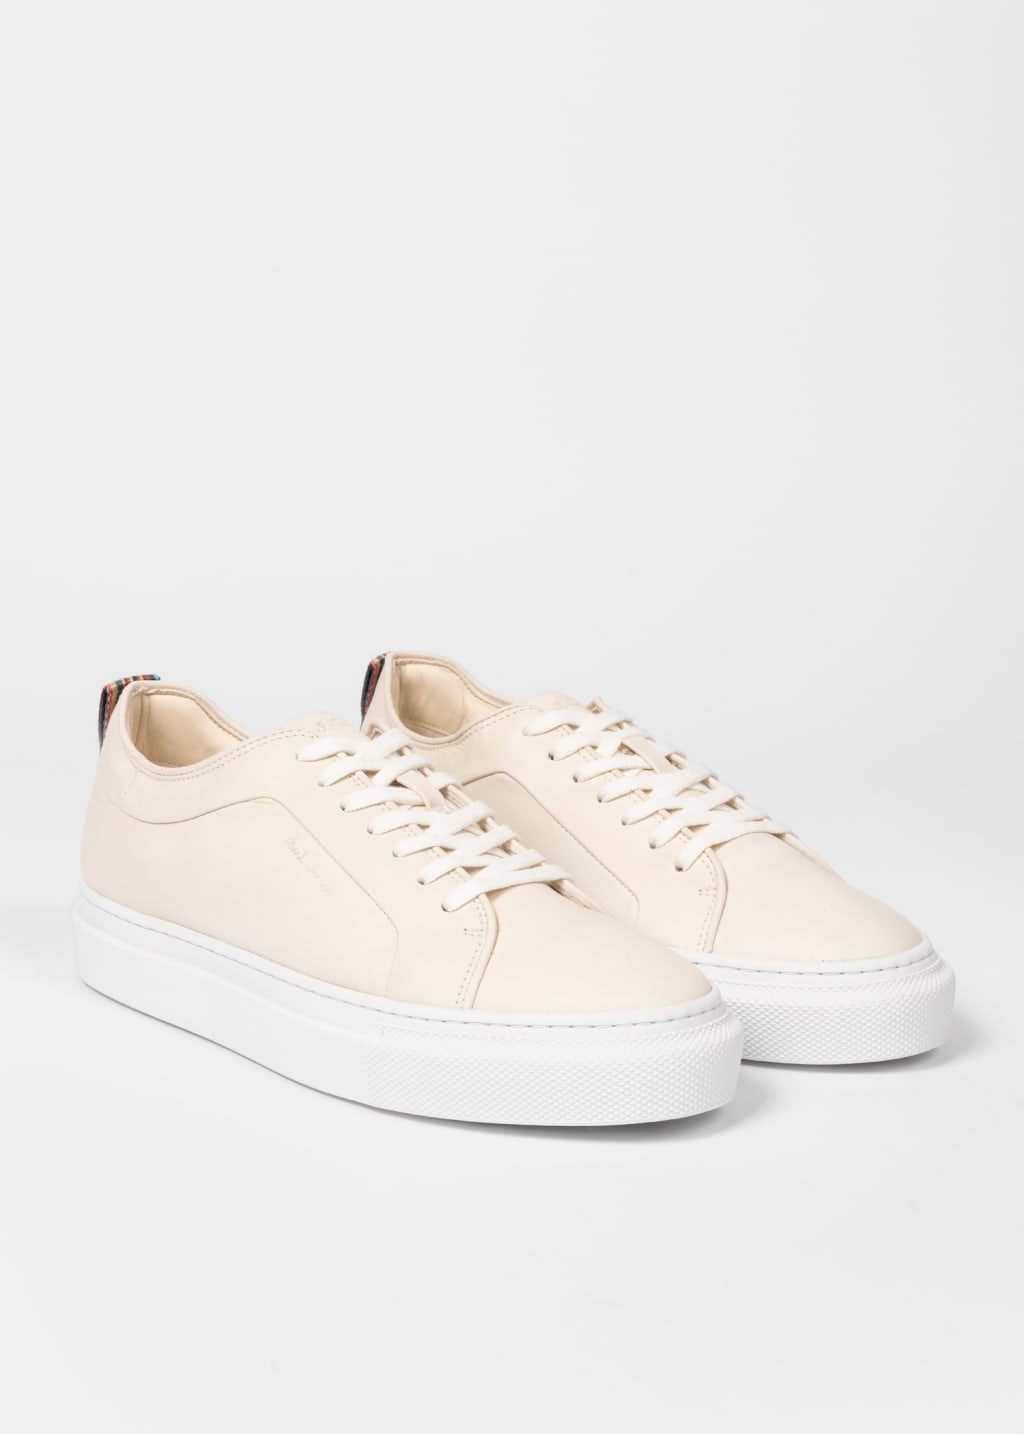 Pair View - Cream Leather 'Malbus' Trainers Paul Smith